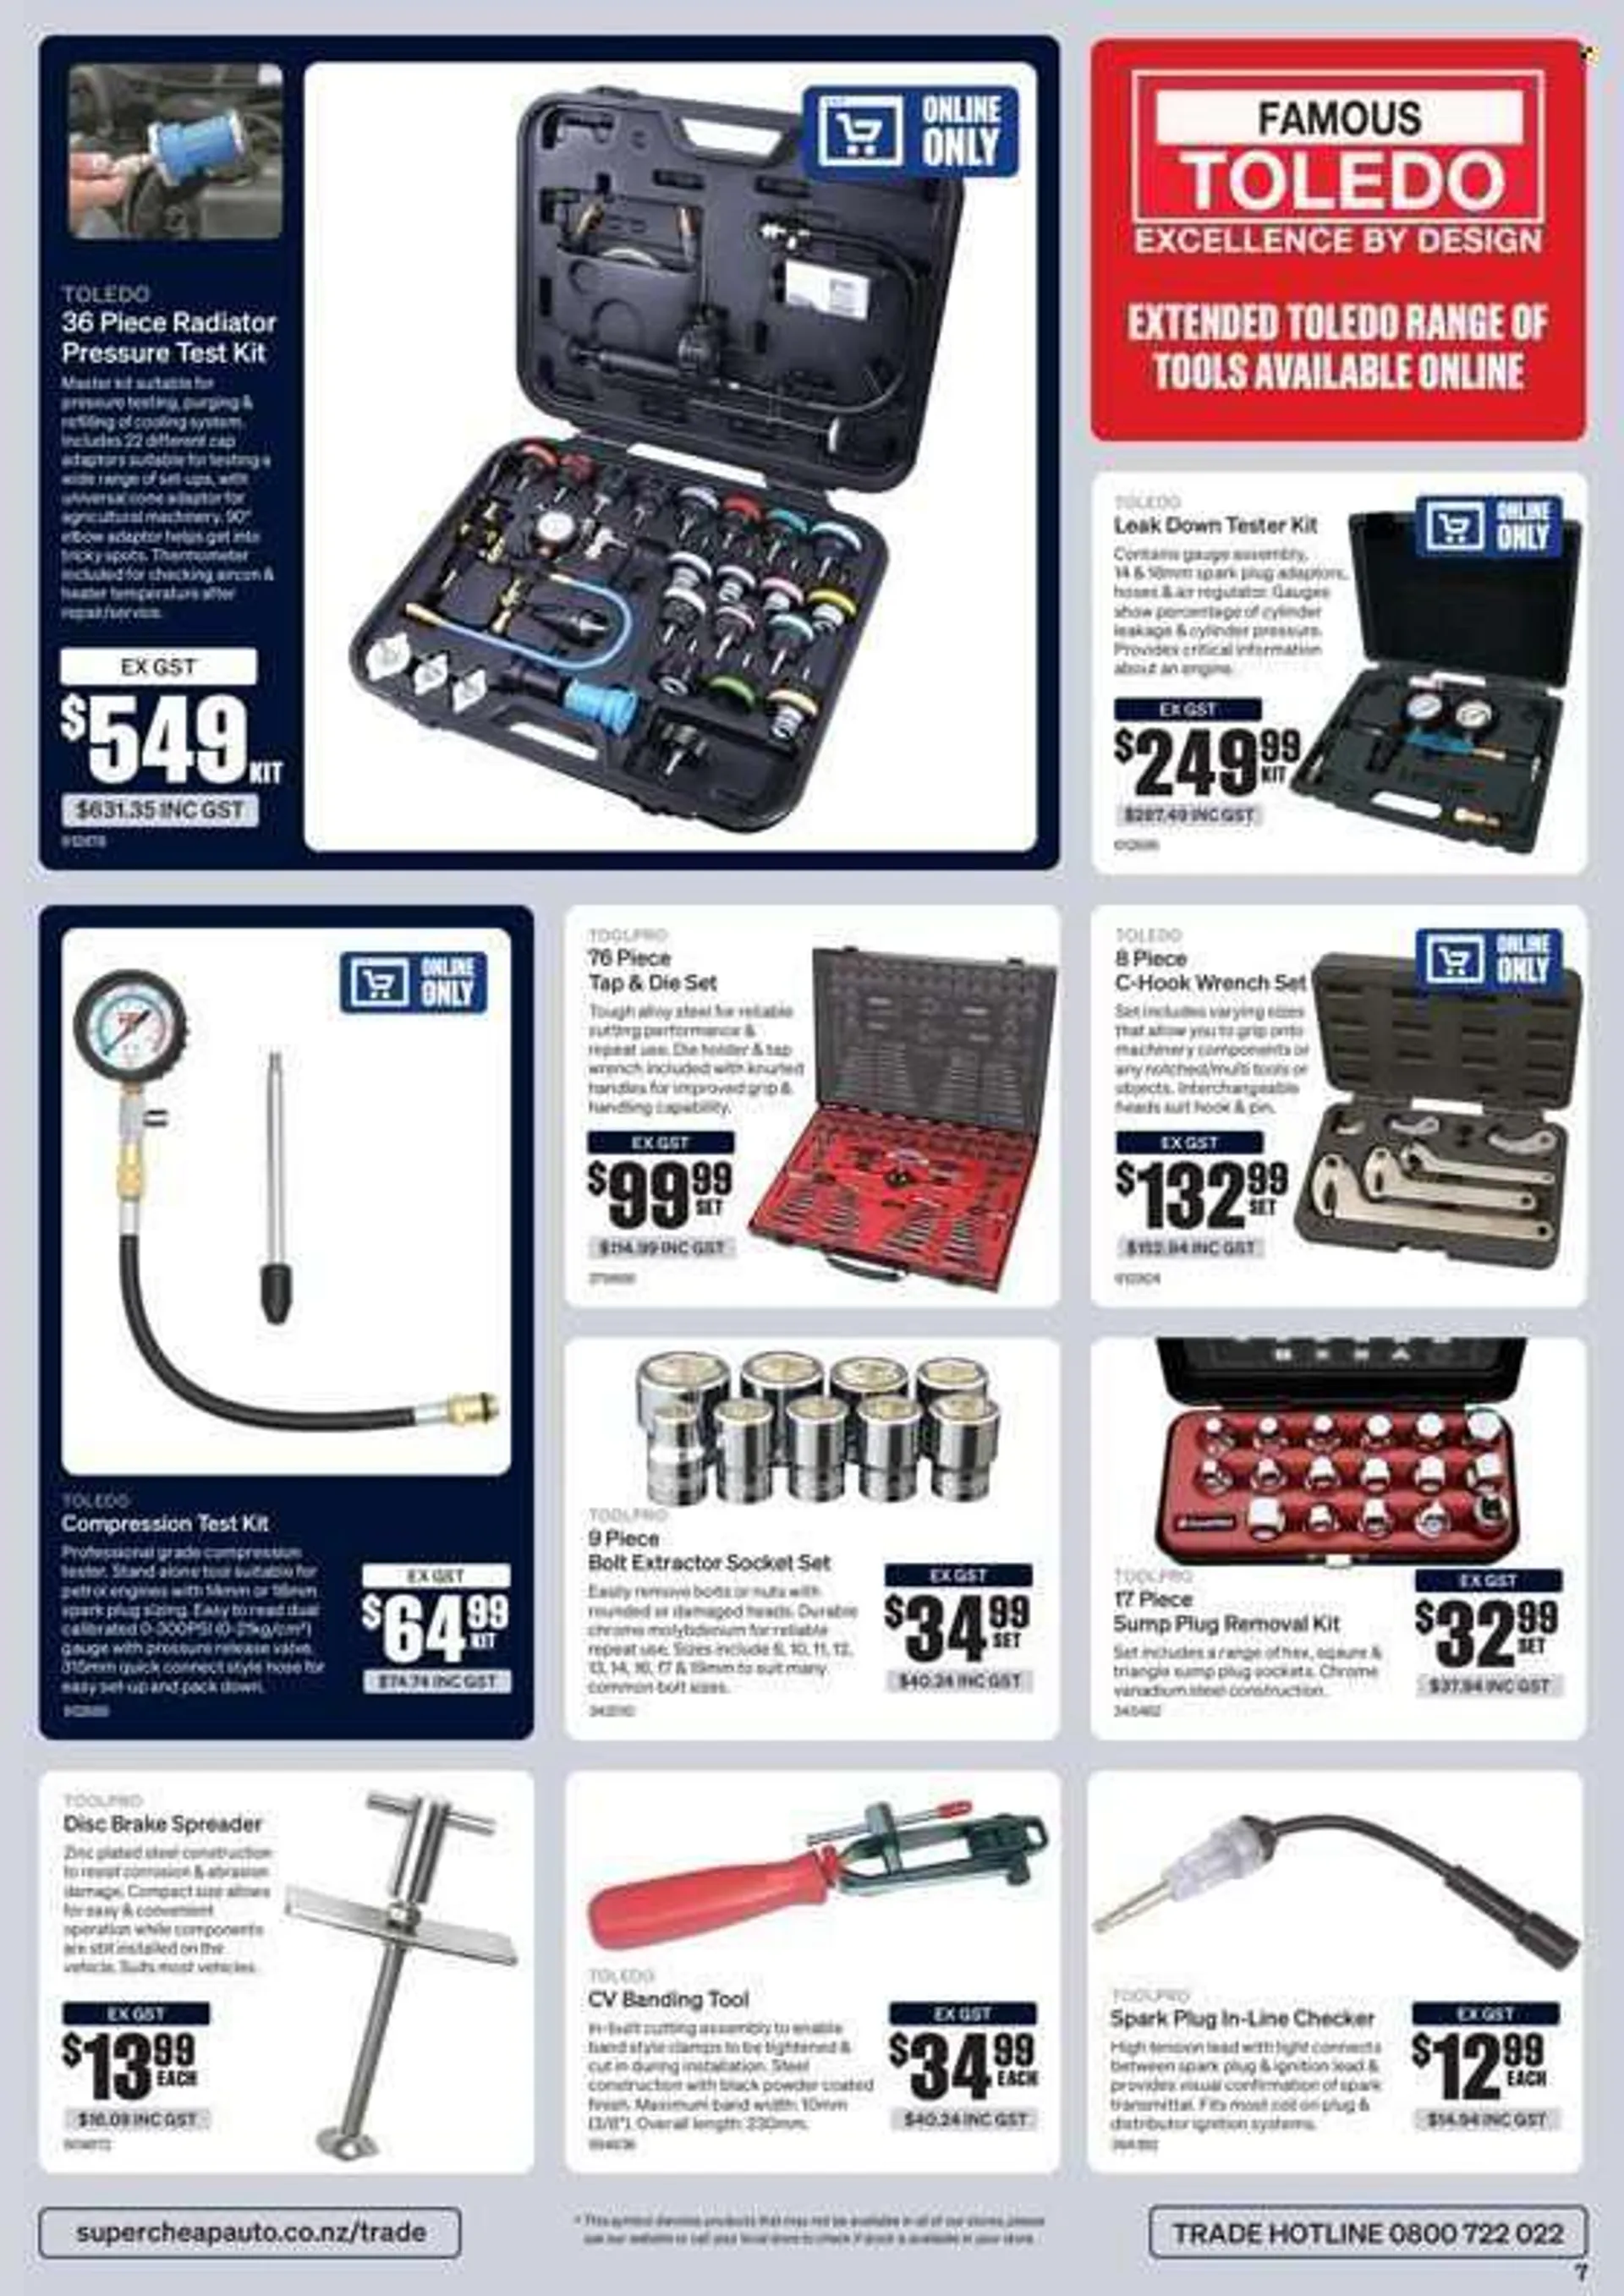 SuperCheap Auto mailer - 01.05.2022 - 30.06.2022. - 1 May 30 June 2022 - Page 7